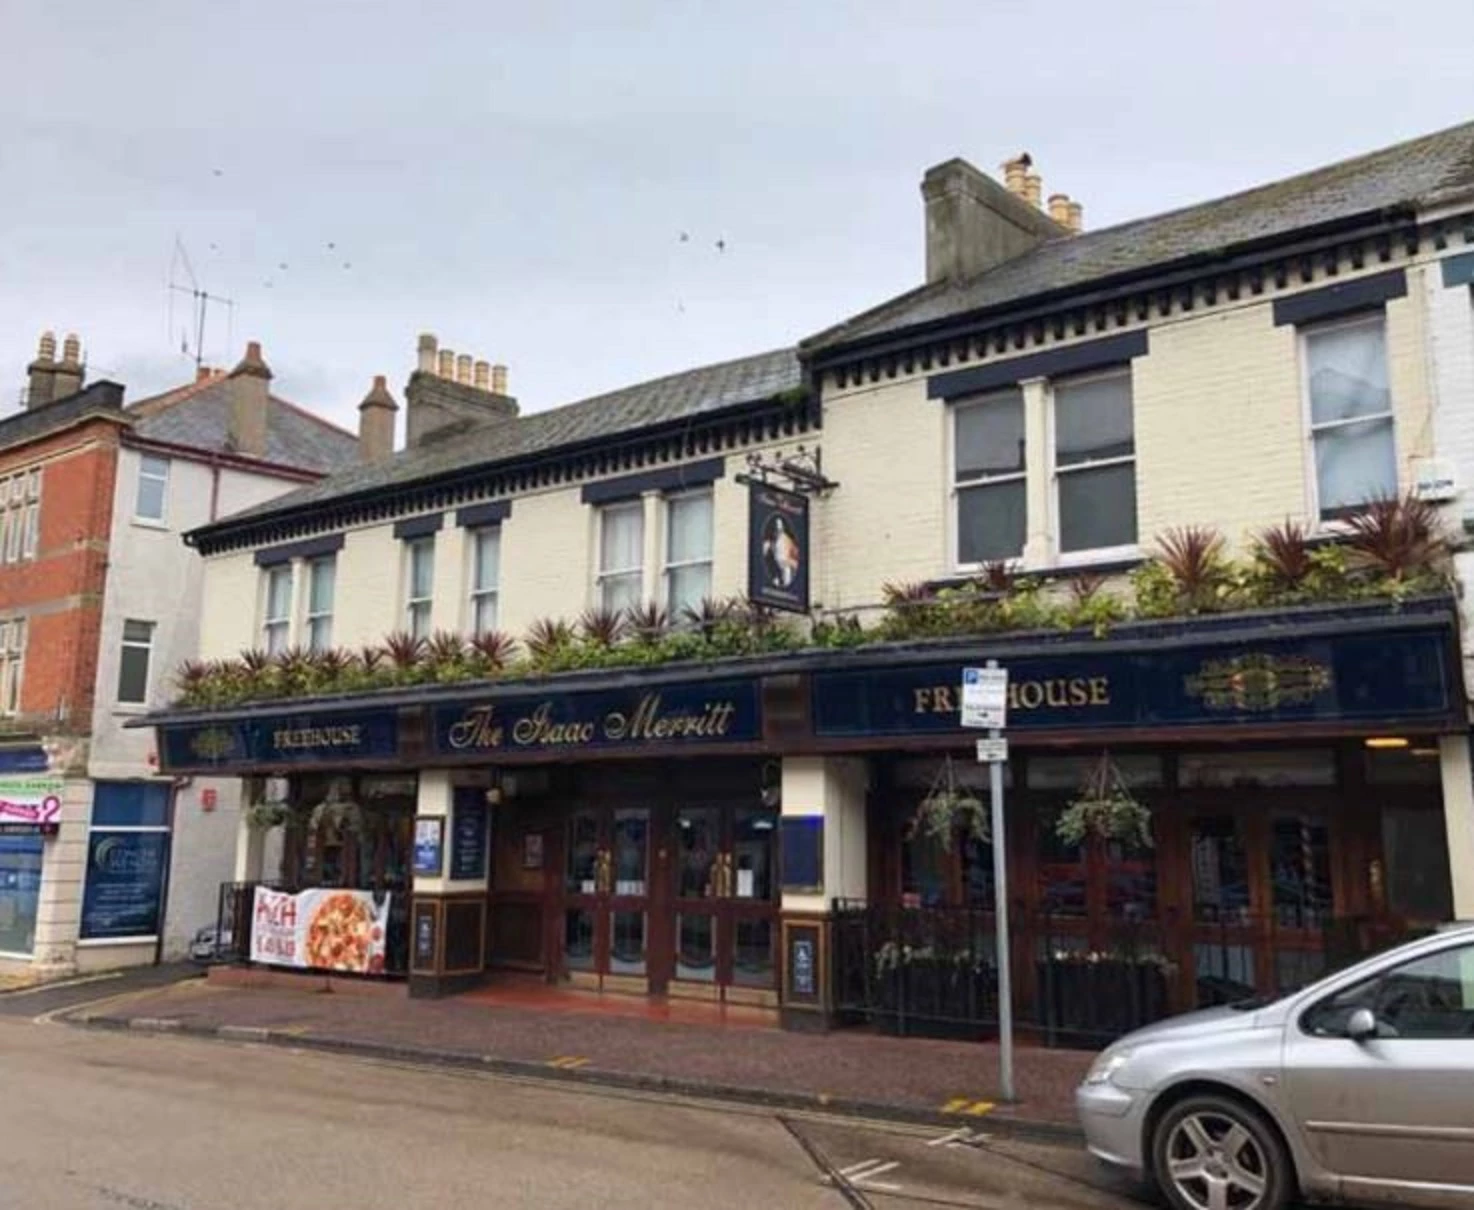 The Isaac Merritt pub in Paignton, up for auction with Pugh